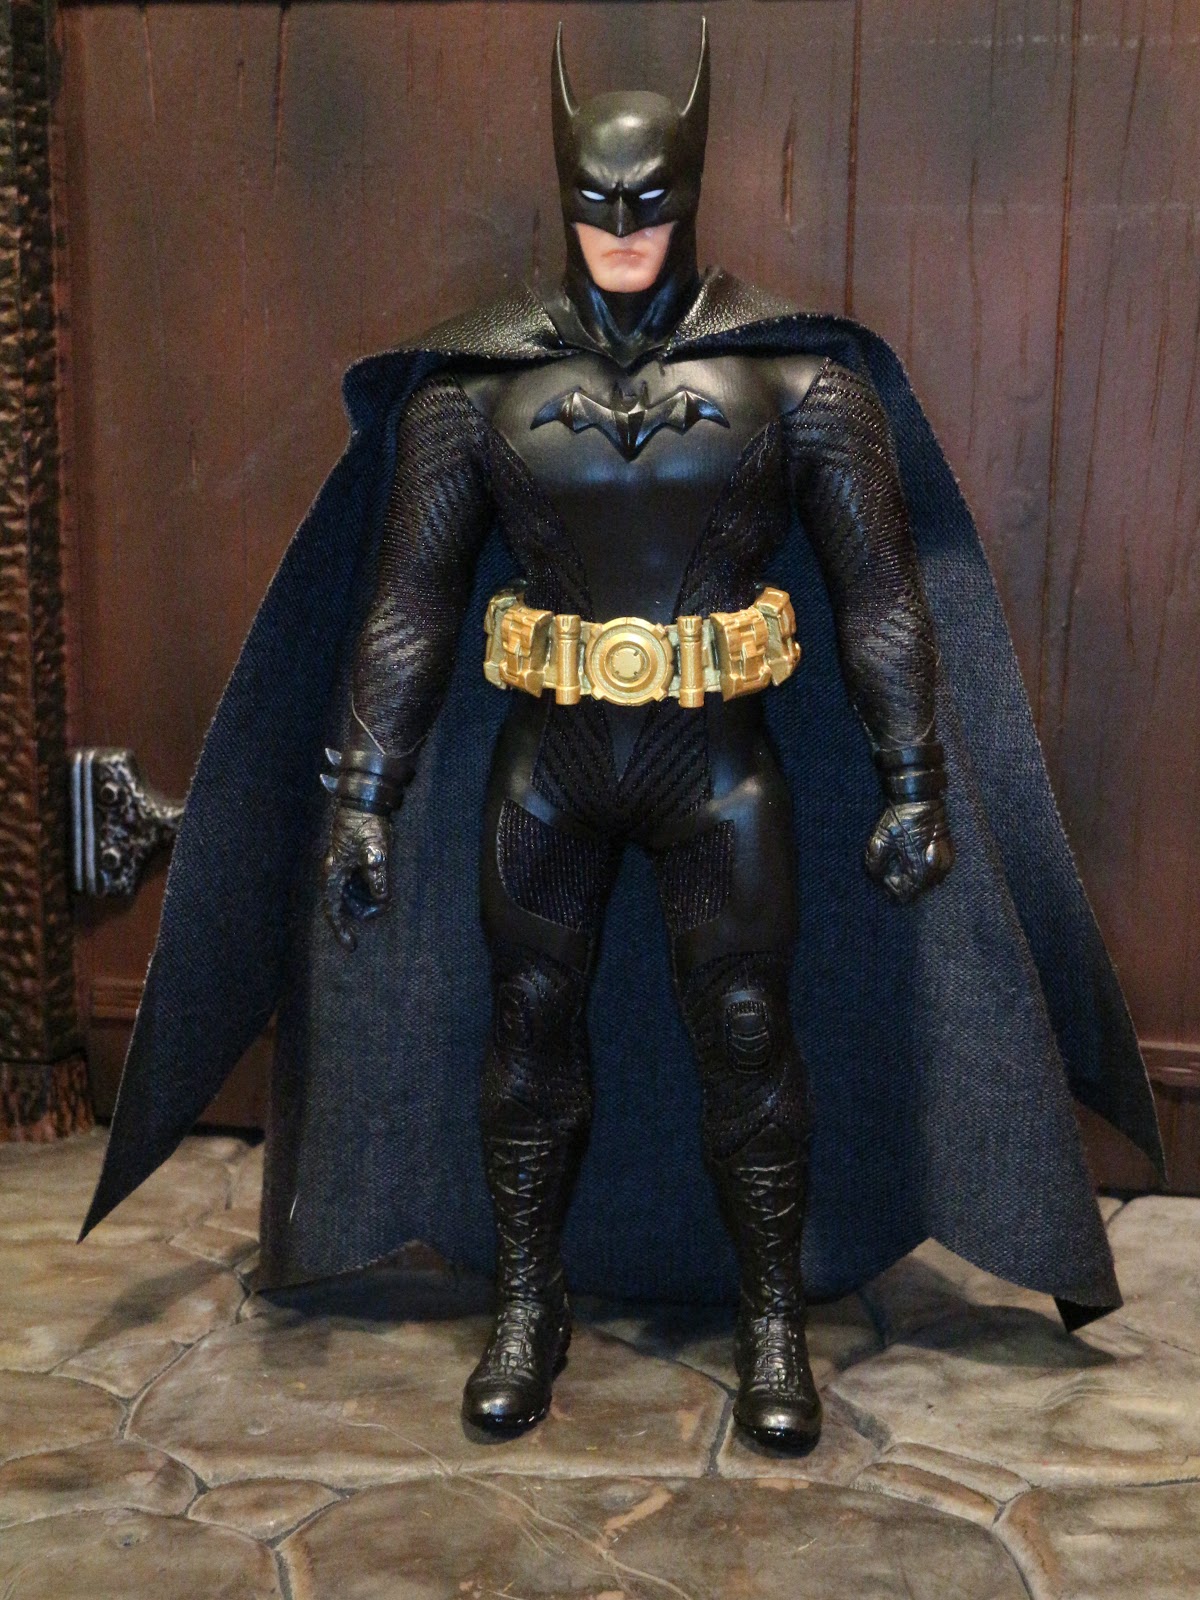 Action Figure Barbecue: Action Figure Review: Batman: Ascending Knight  (Mezco Exclusive) from One:12 Collective: DC Universe by Mezco